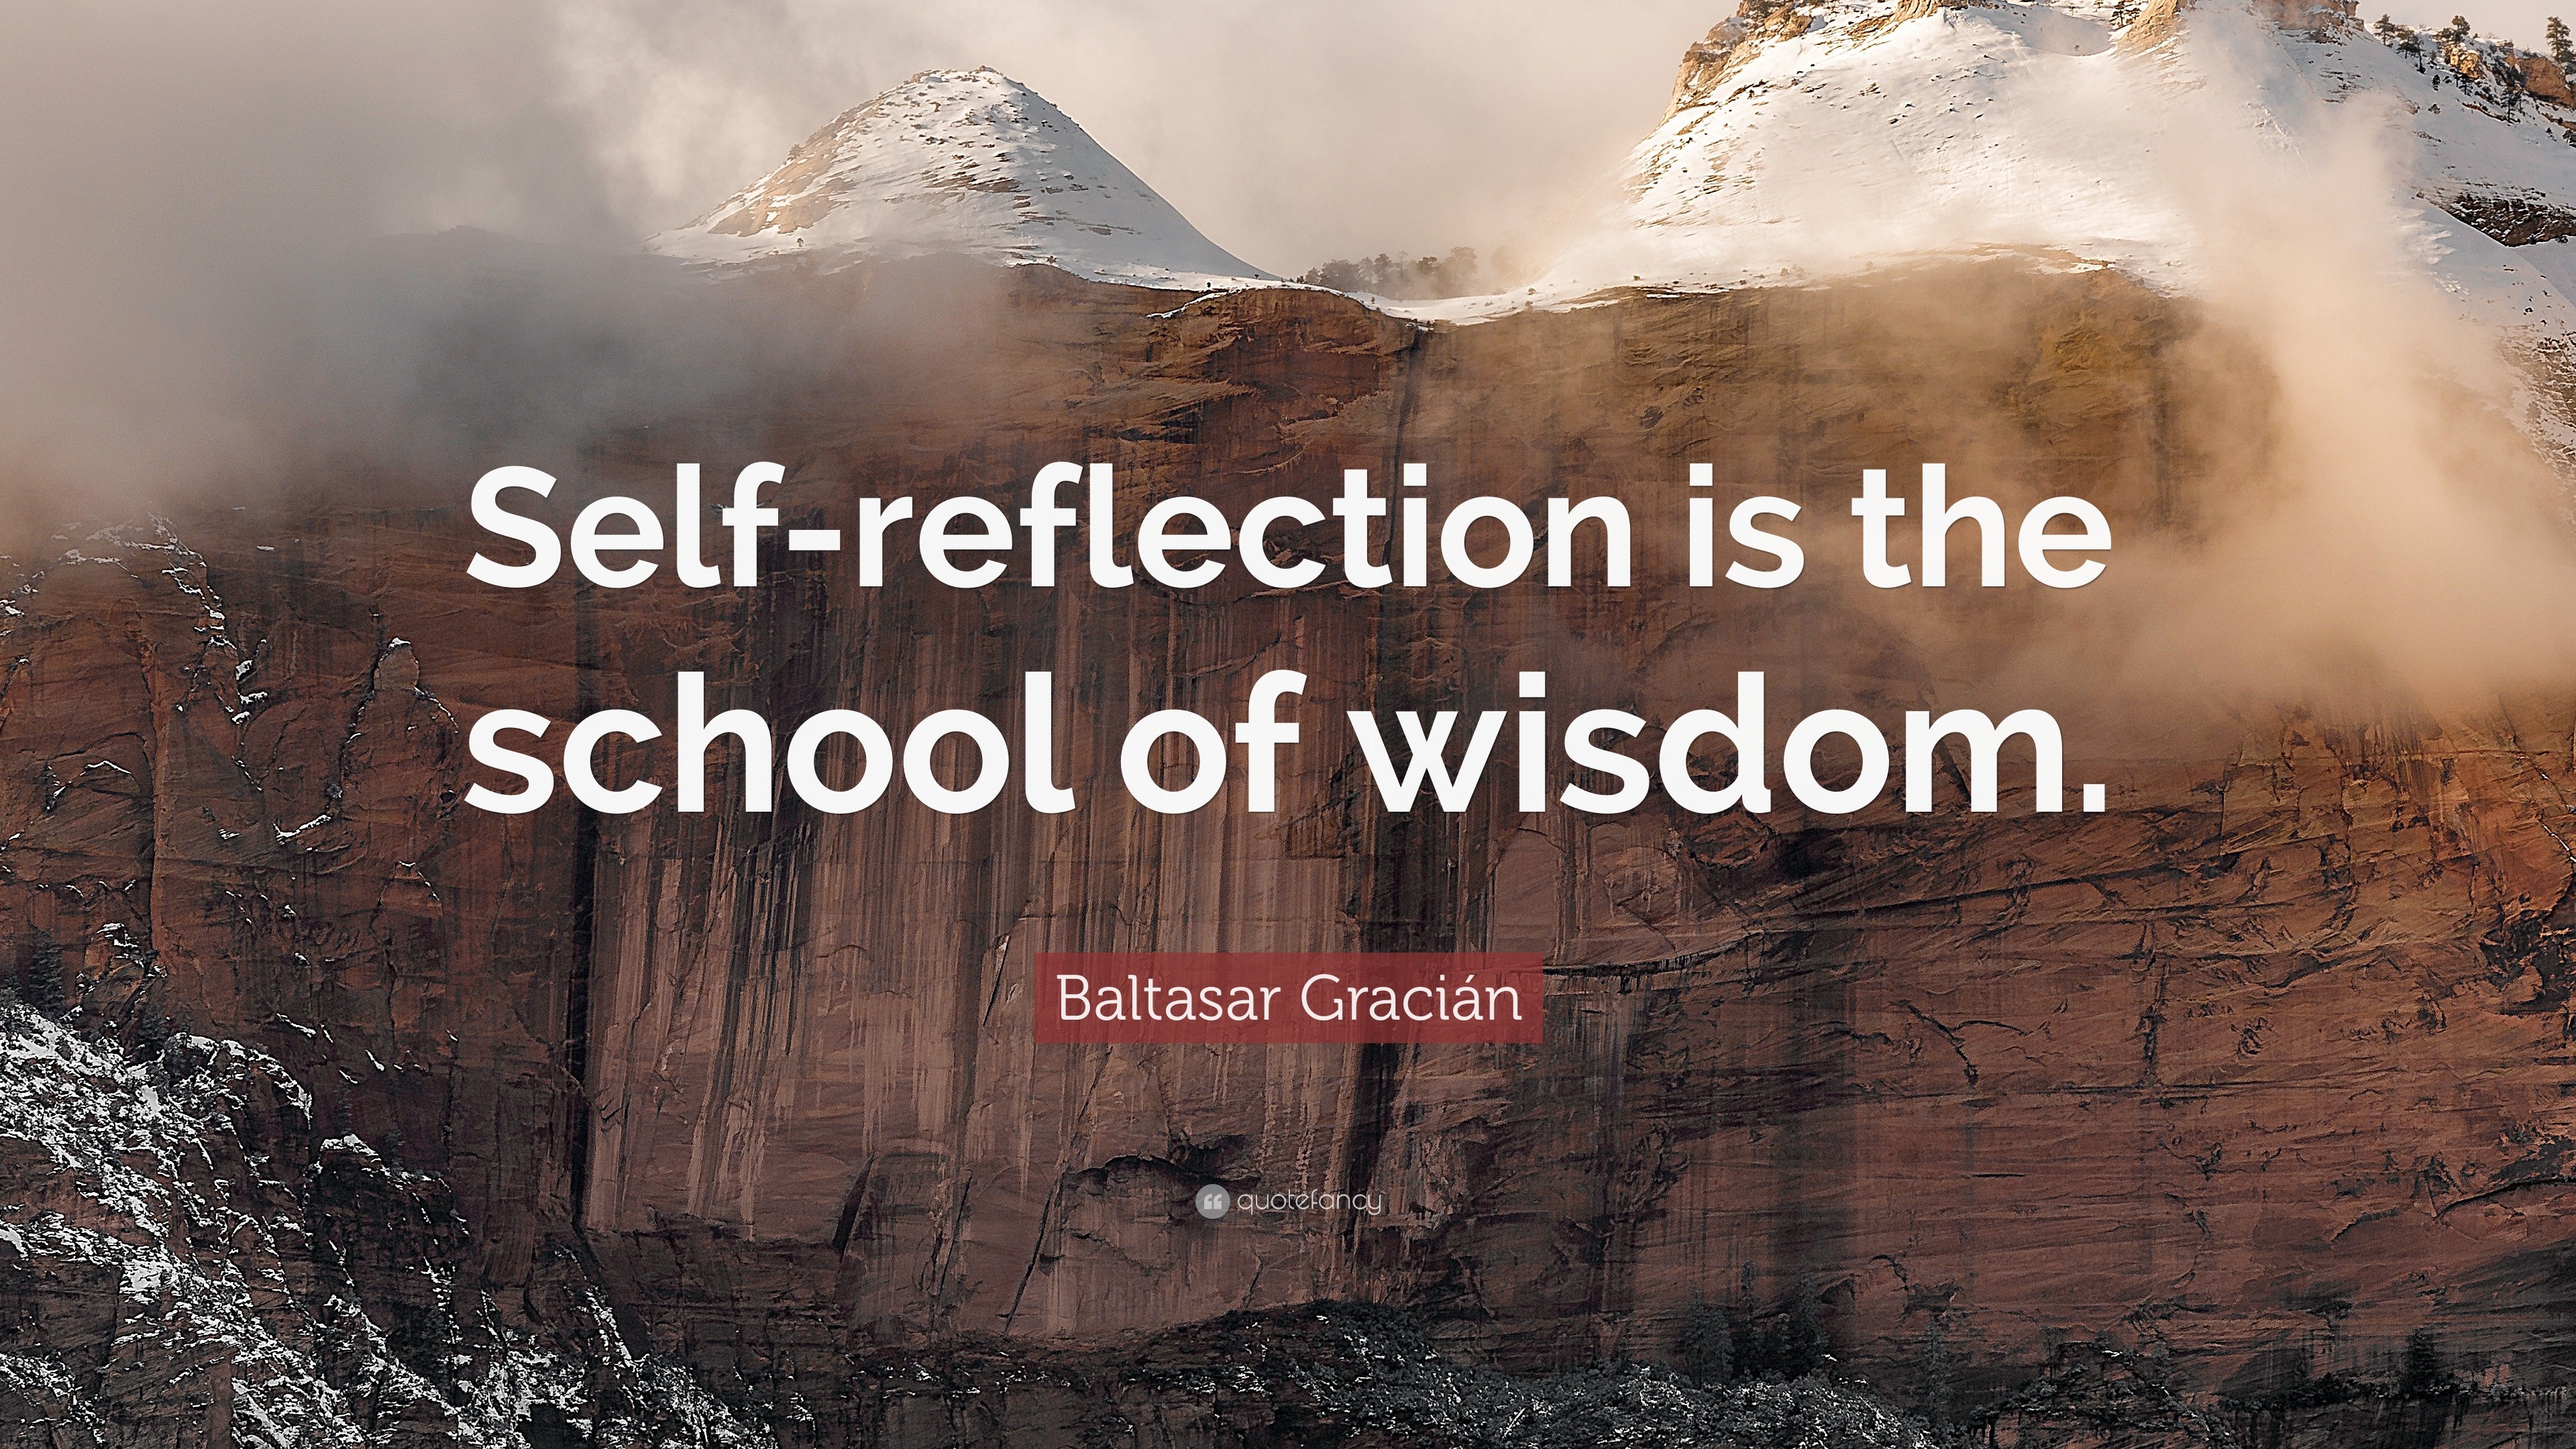 Baltasar Gracián Quote “Selfreflection is the school of